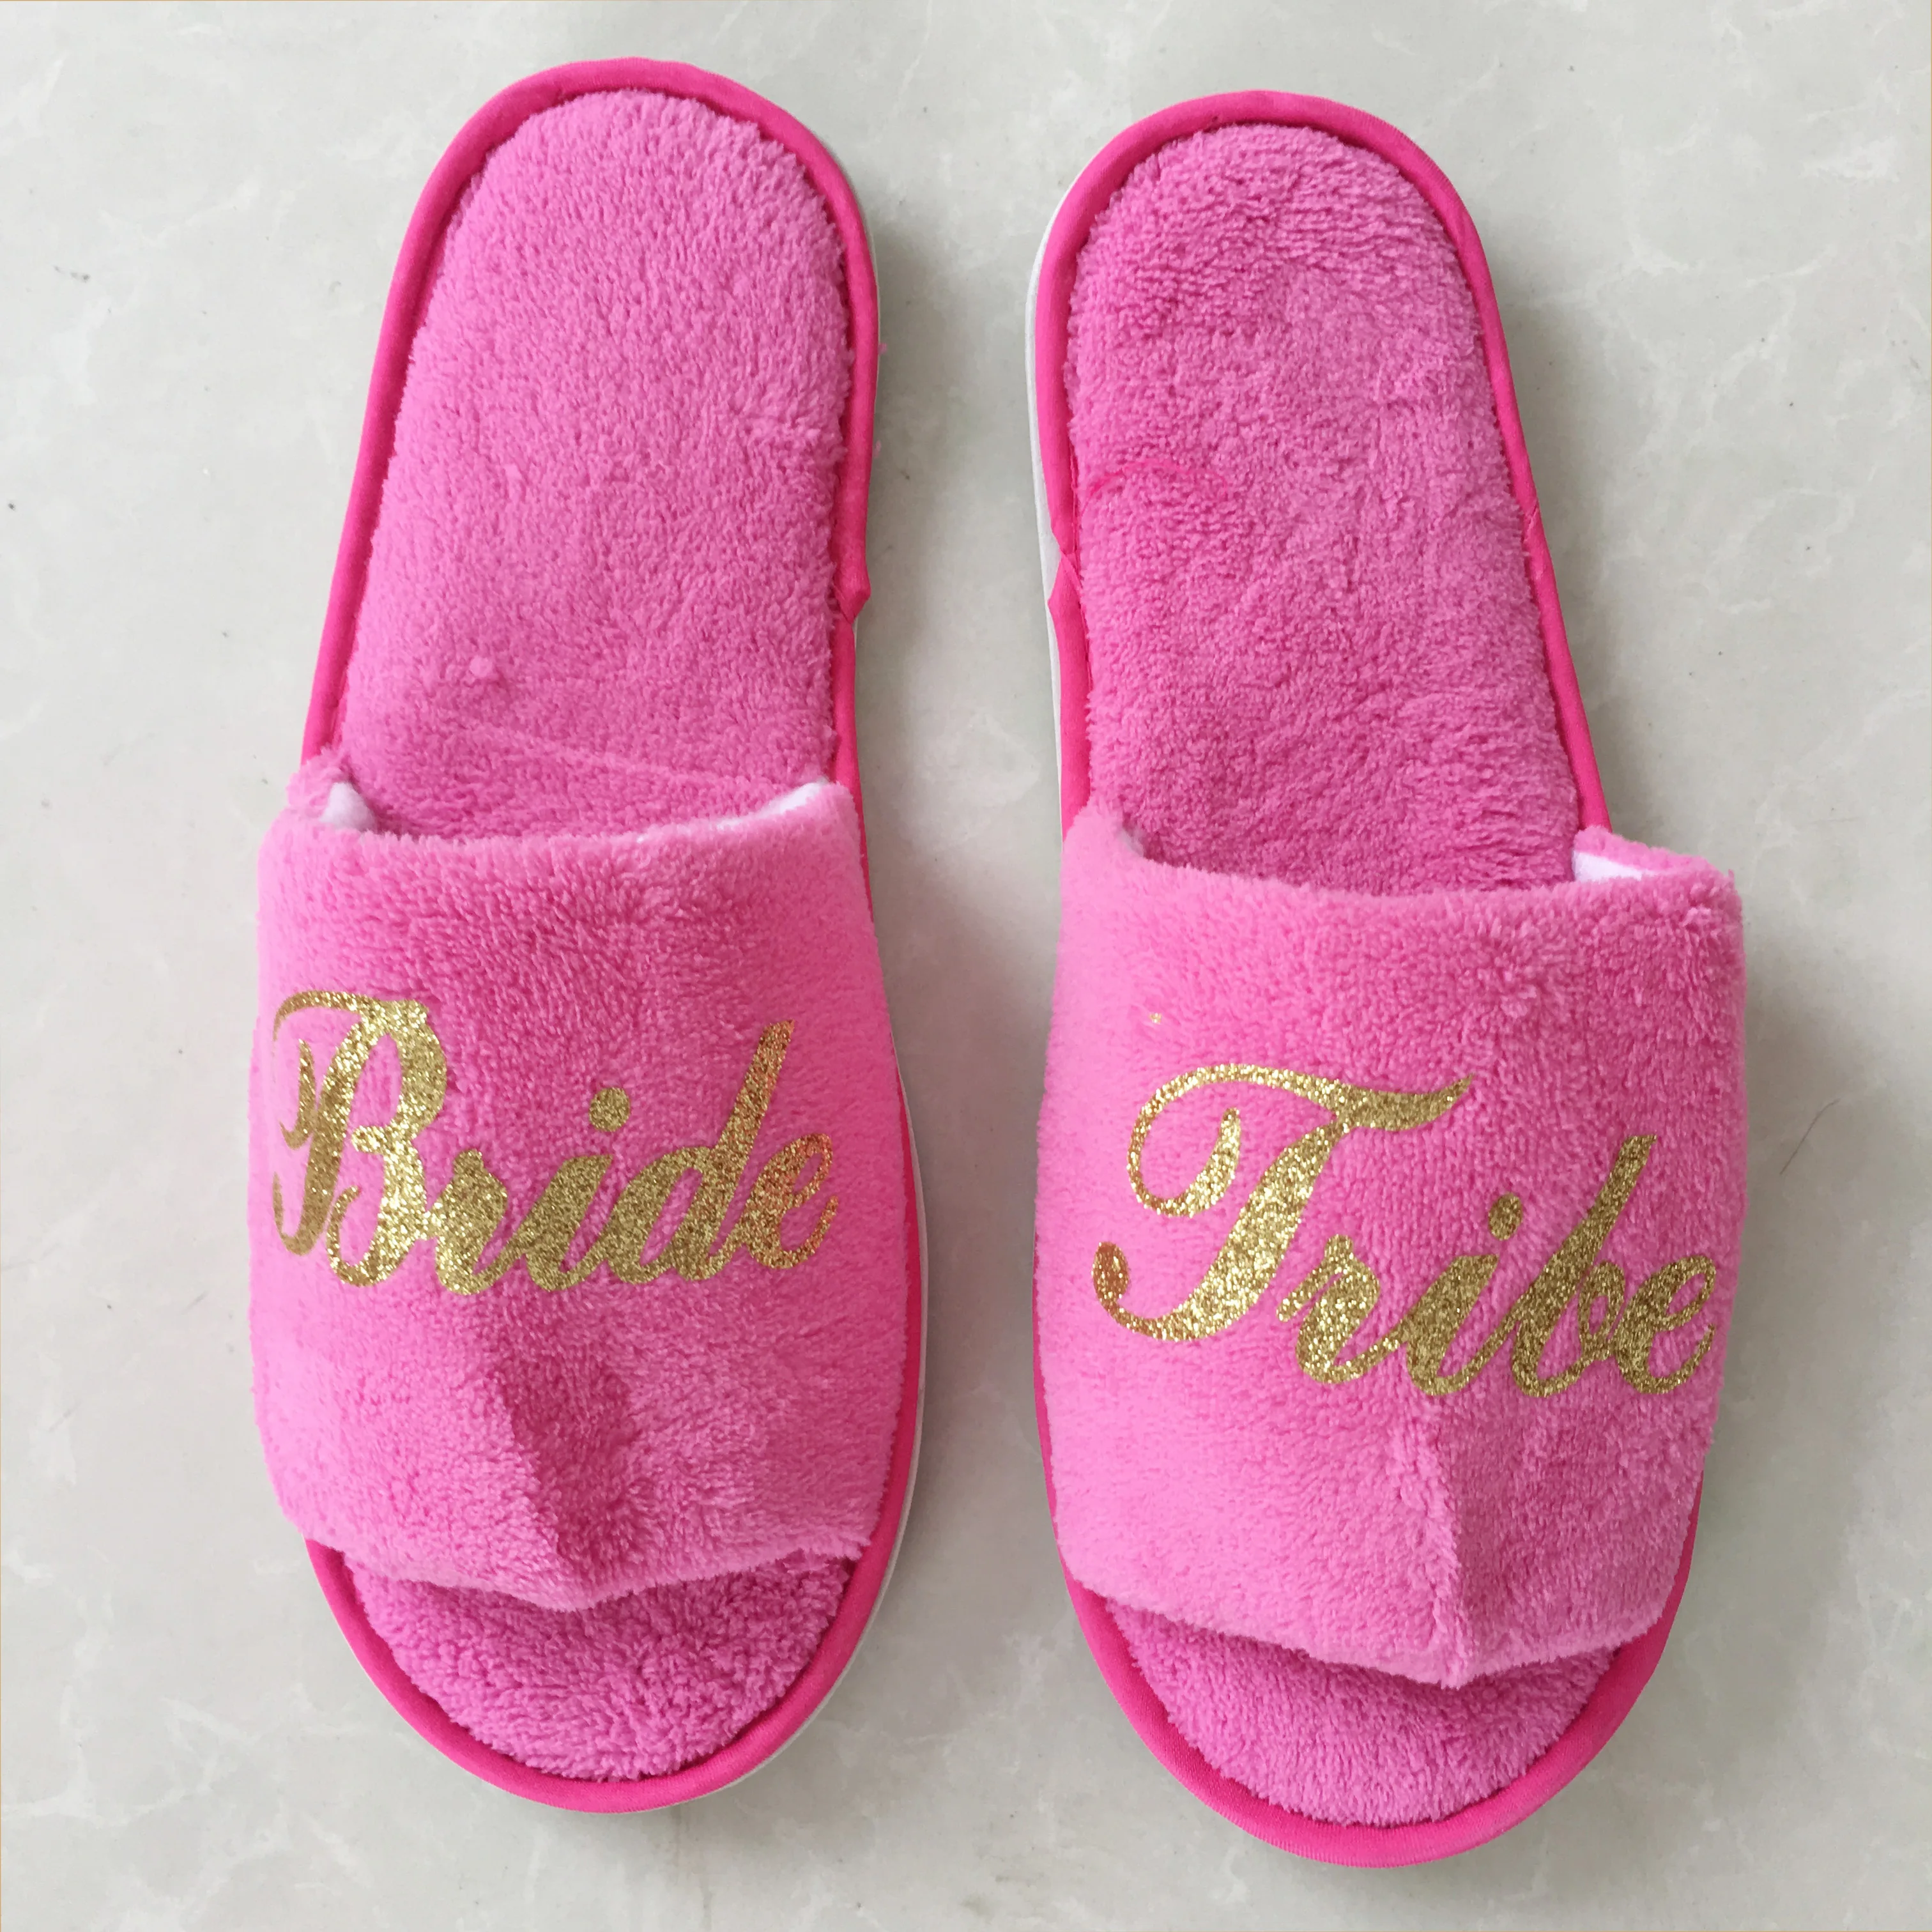 

5pairs personalize any text language Unique Custom logo Wedding Bride to be Bridesmaid gifts Personalized Slippers gift